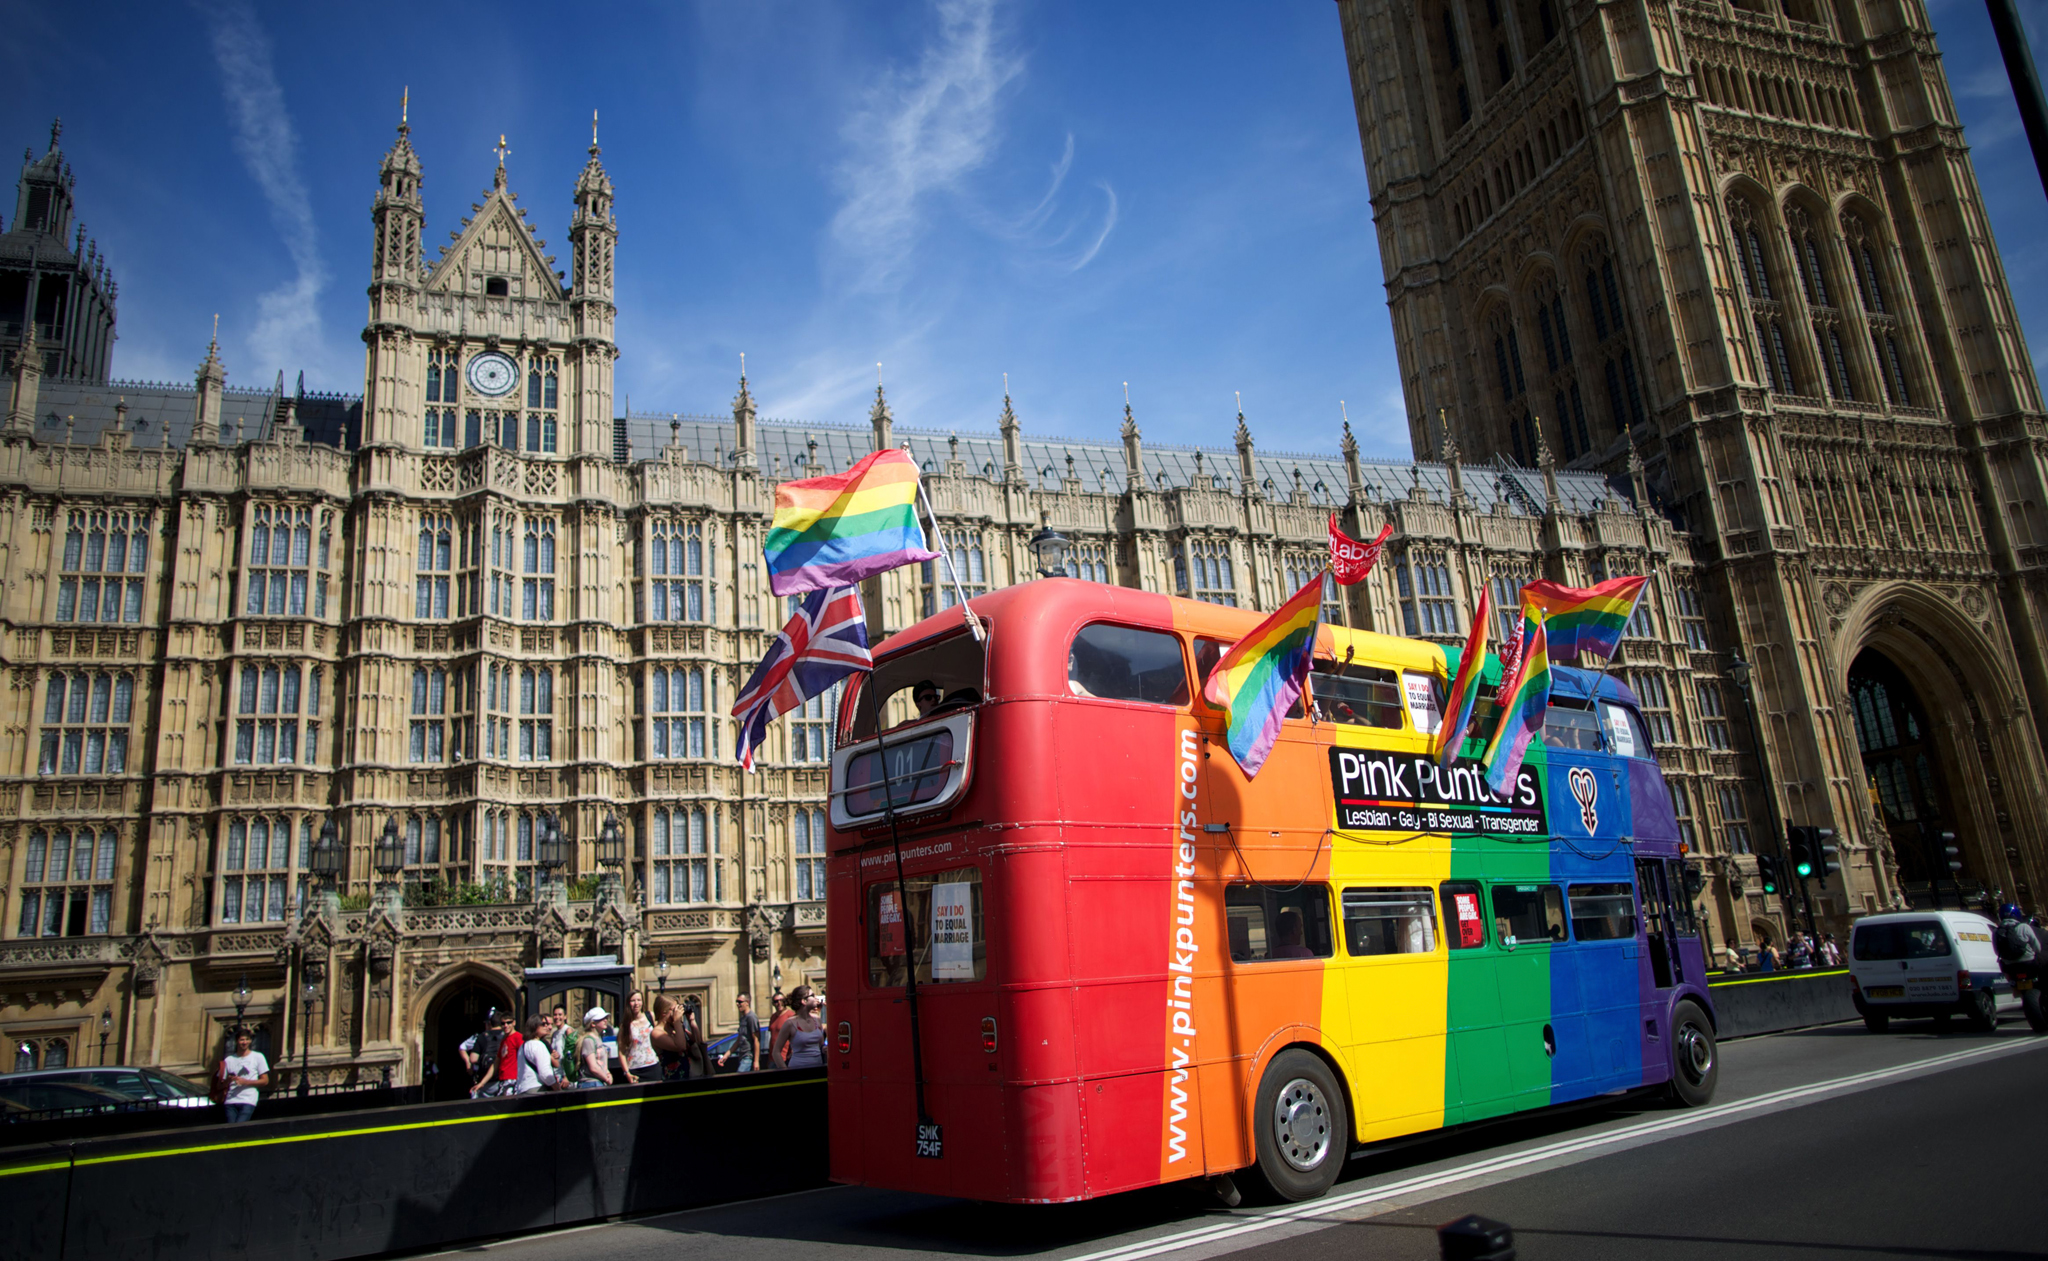 Gay campaigners drive a bus past the Hou